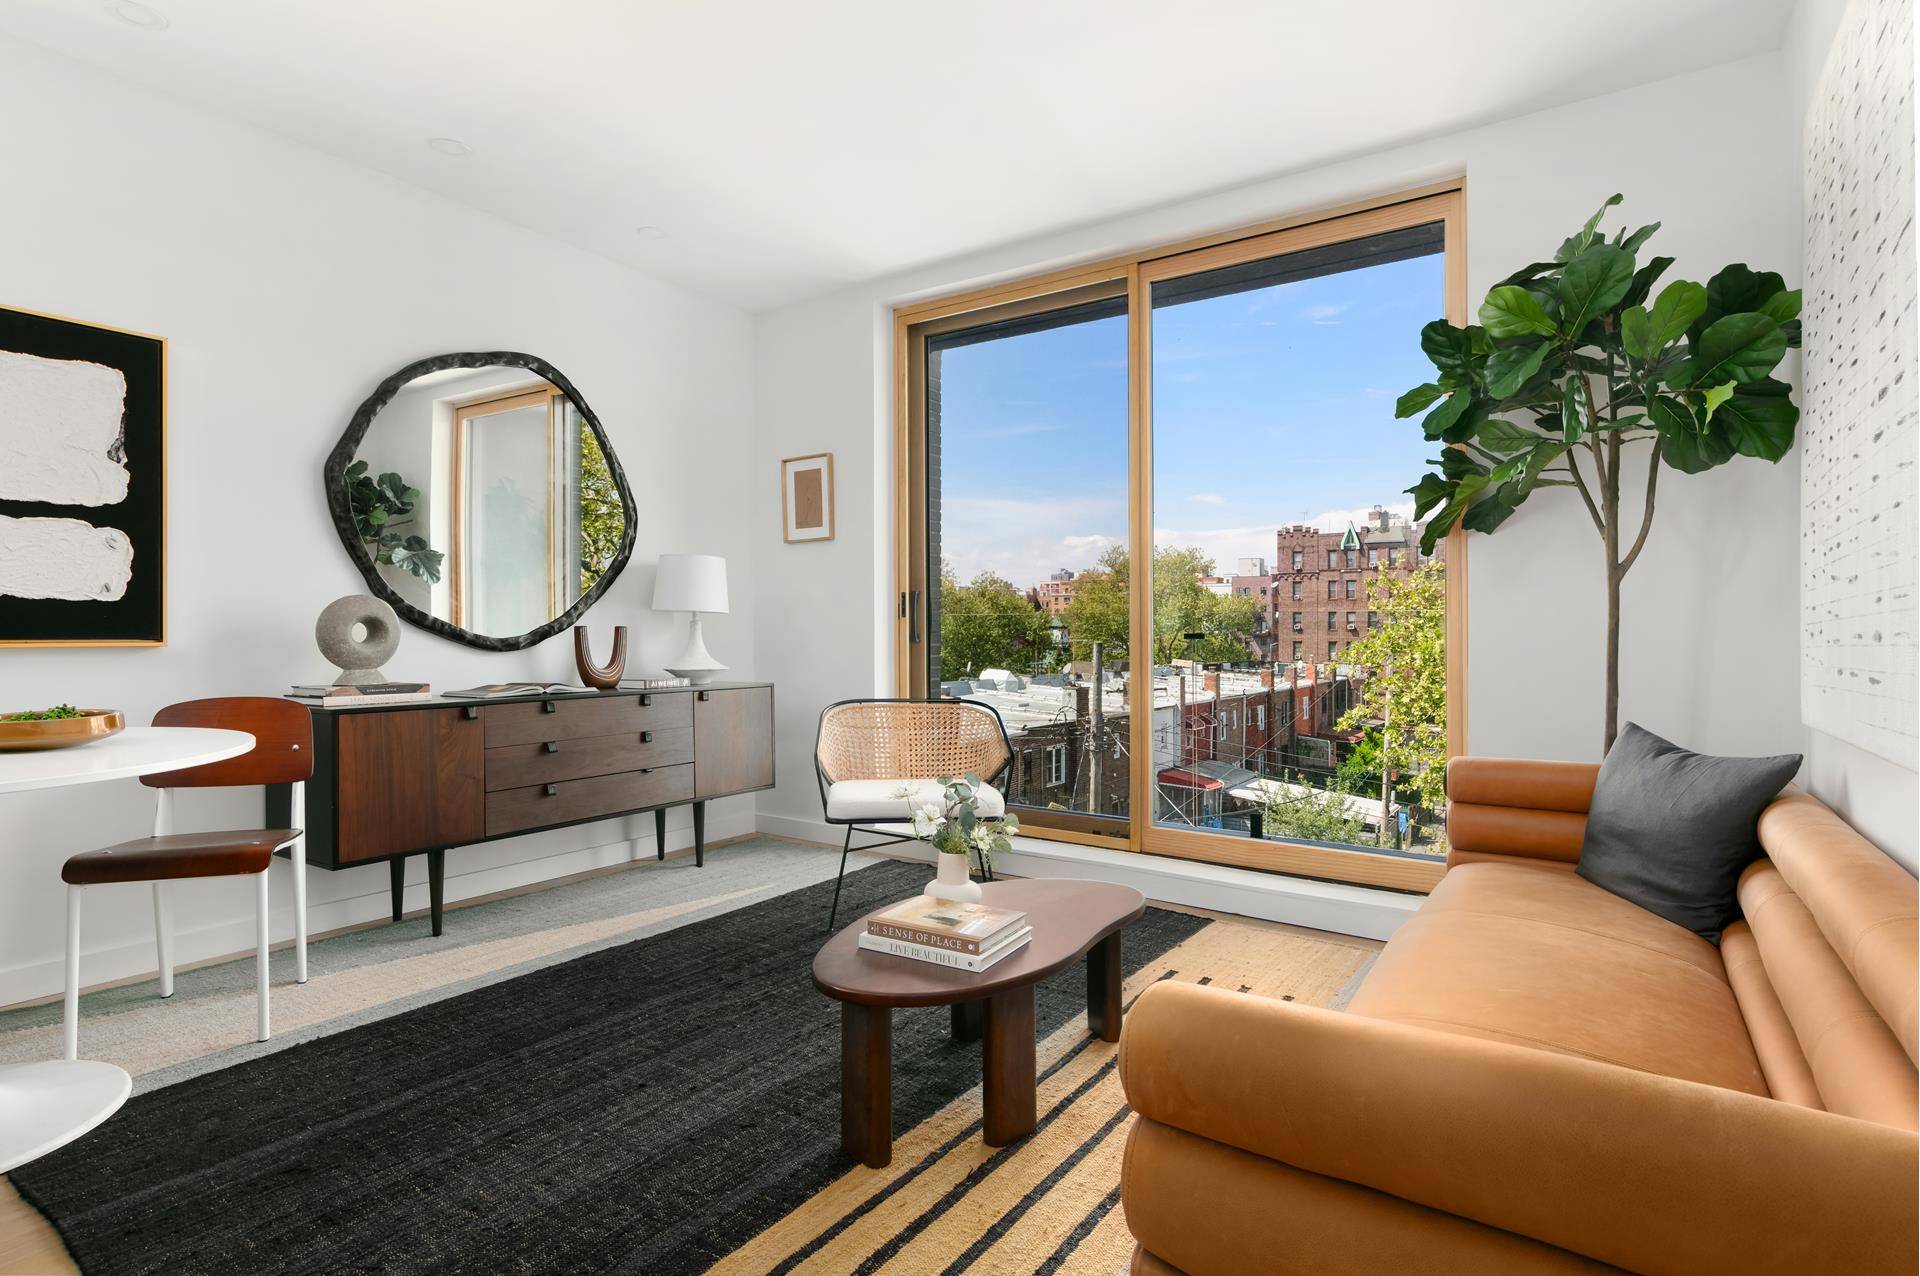 Introducing 3C at 406 Midwood Street A stunning 1 bed convertible two, 1 bath residence with two private outdoor spaces and triple exposures north, south and west, offering unparalleled value ...